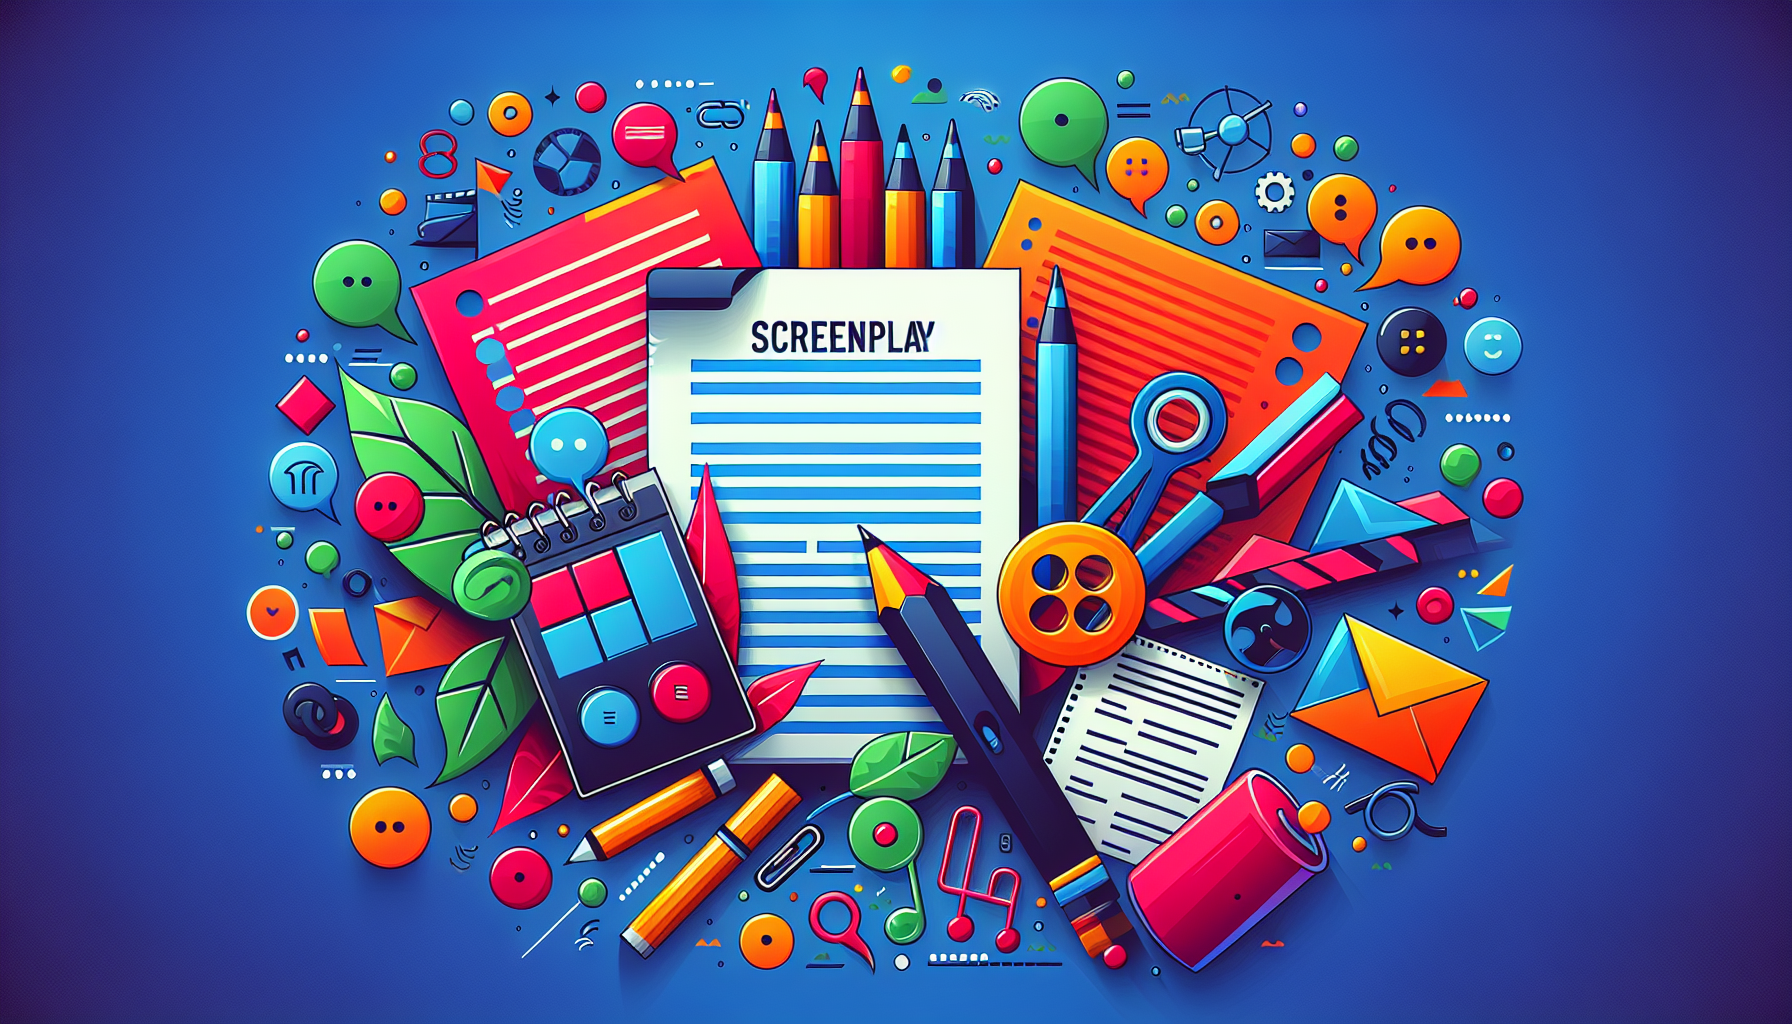 Create an illustration showcasing the essentials of screenplay formatting. The image should be vibrant with colors and reflect a contemporary design aesthetic. It should involve various elements related to screenplay formatting such as script pages, scriptwriting tools, and dialogue bubbles. However, the image should not contain any text, relying entirely on visual elements to convey the information.